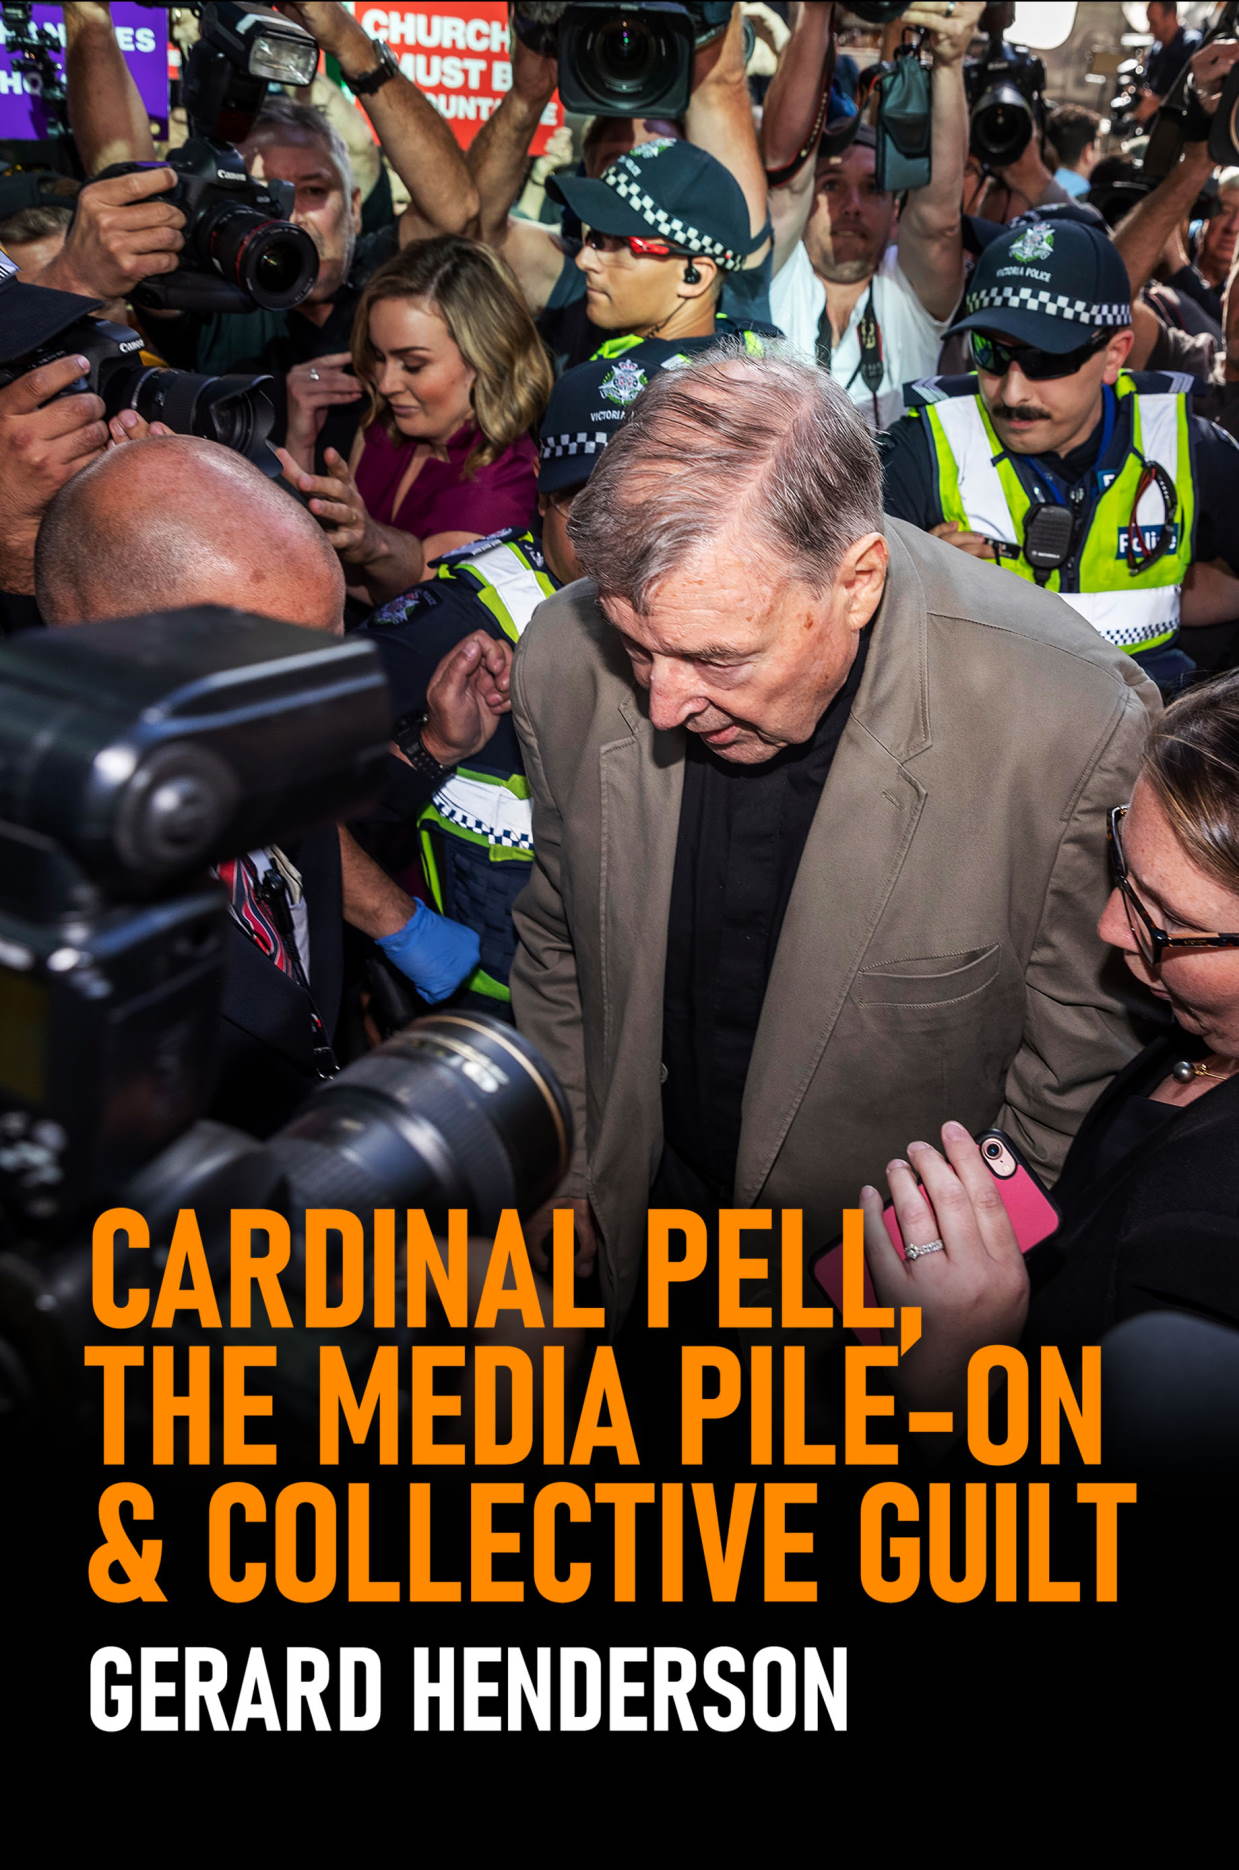 Cardinal Pell, The Media Pile-on & Collective Guilt | Gerard Henderson